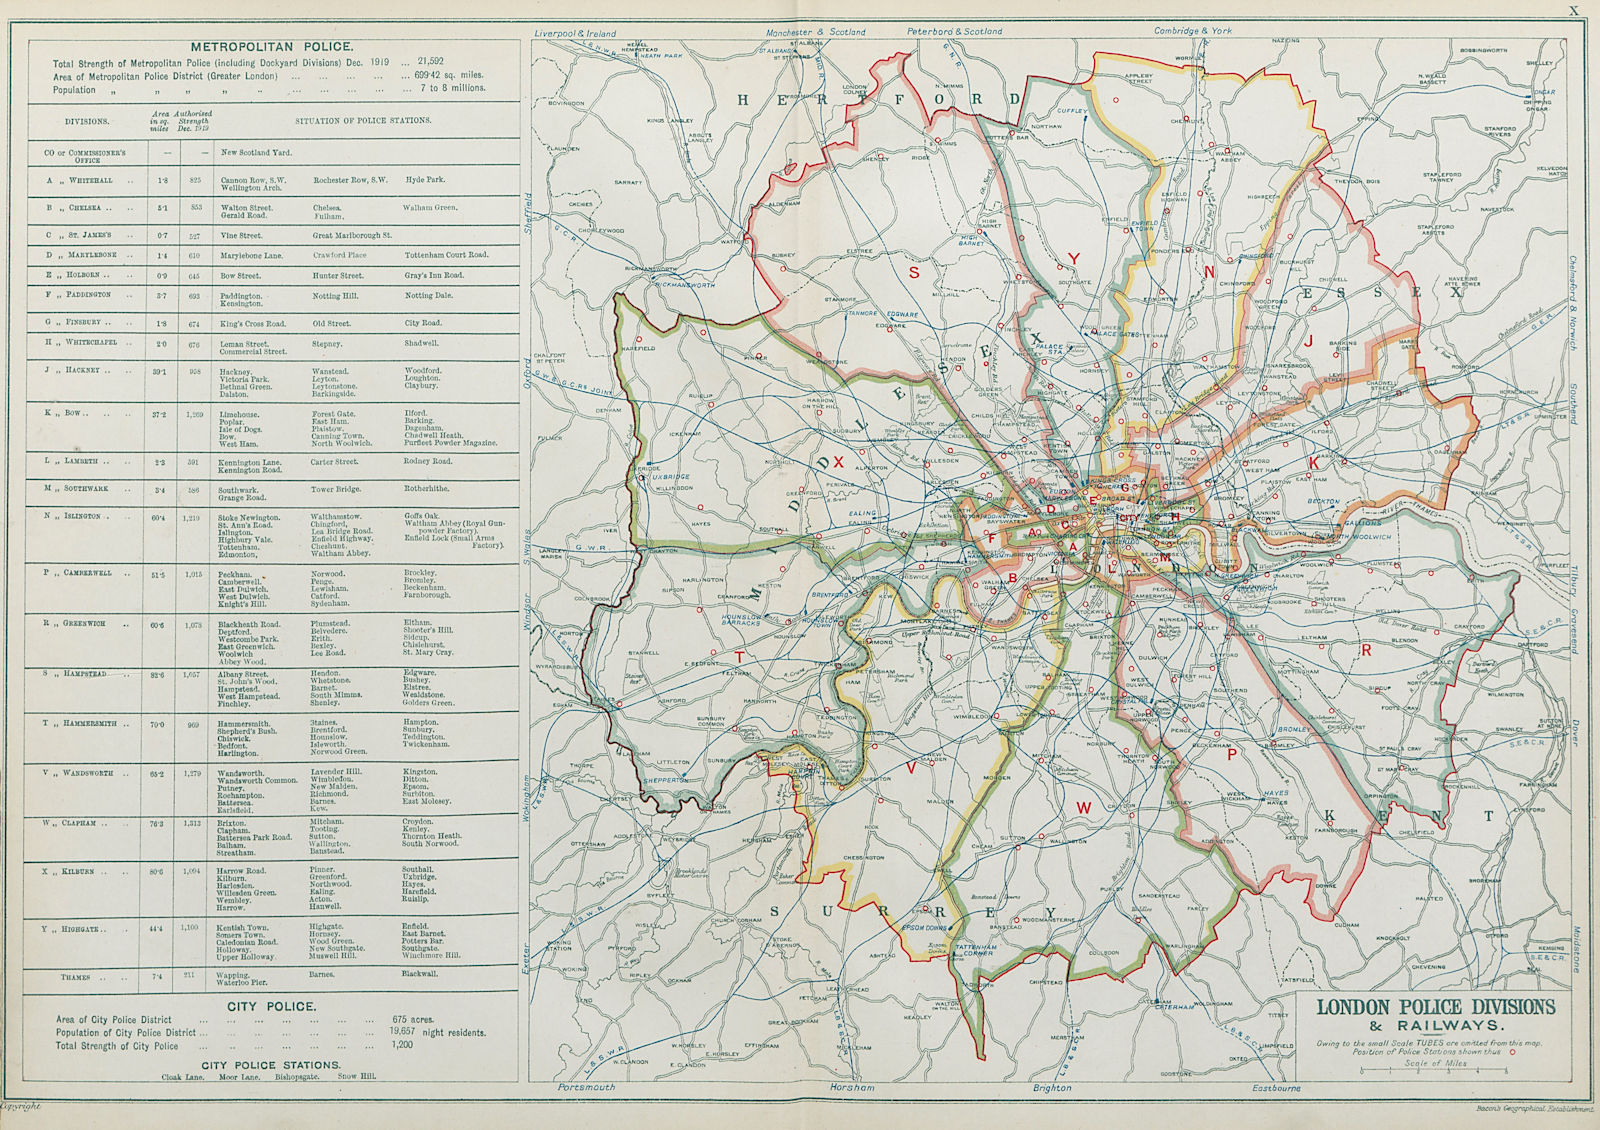 LONDON POLICE DIVISIONS & RAILWAYS showing Police stations. BACON 1920 old map